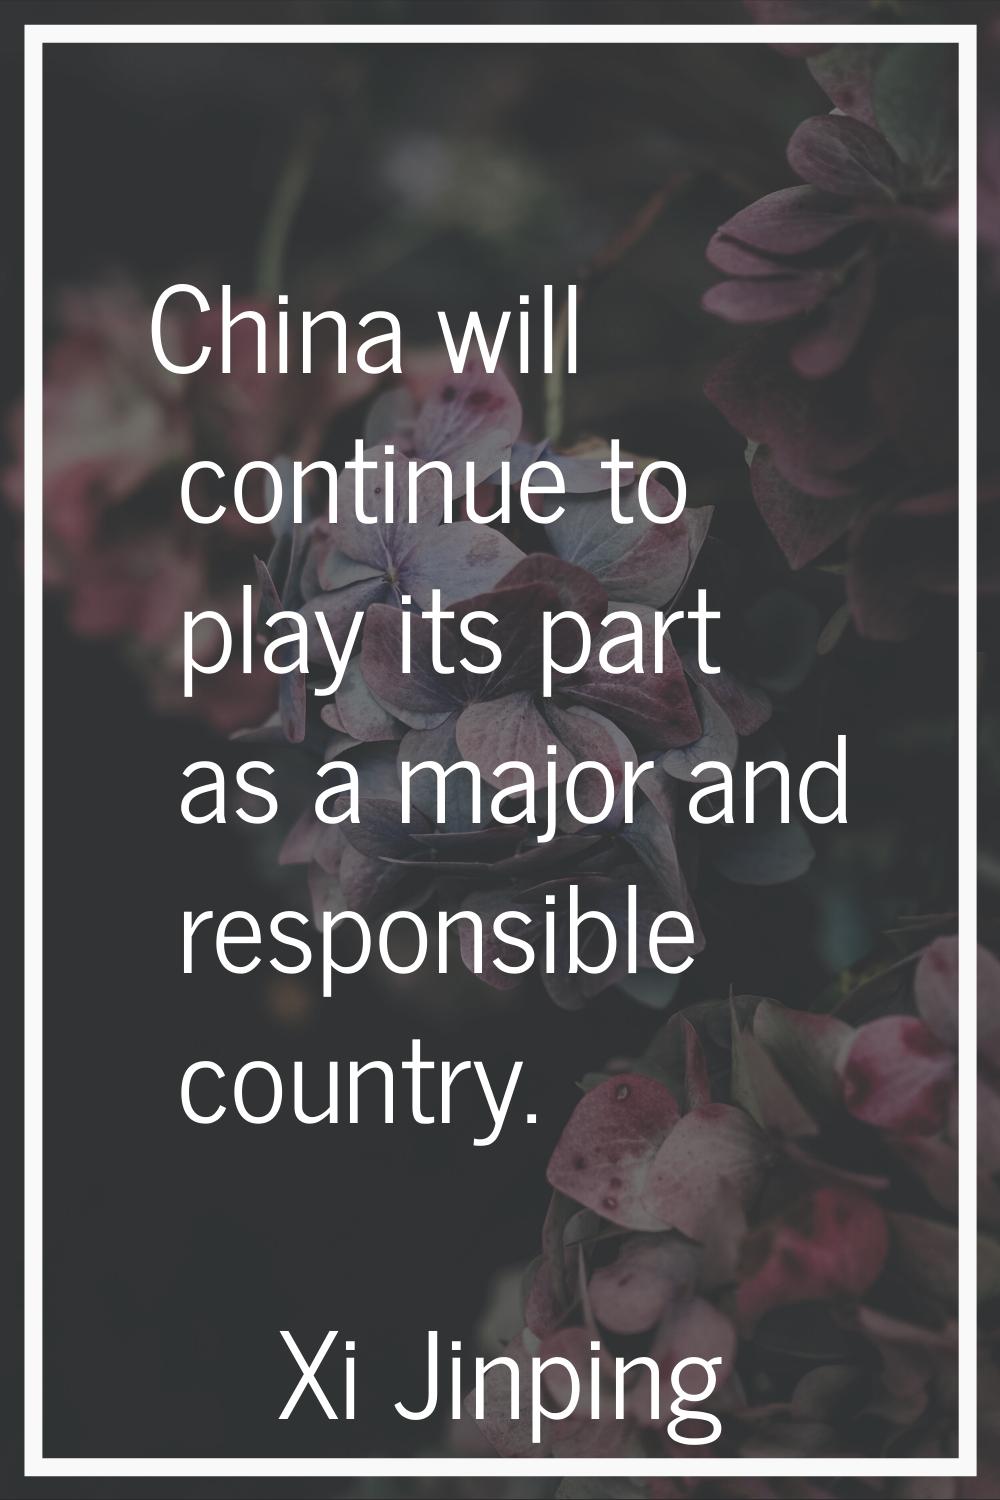 China will continue to play its part as a major and responsible country.